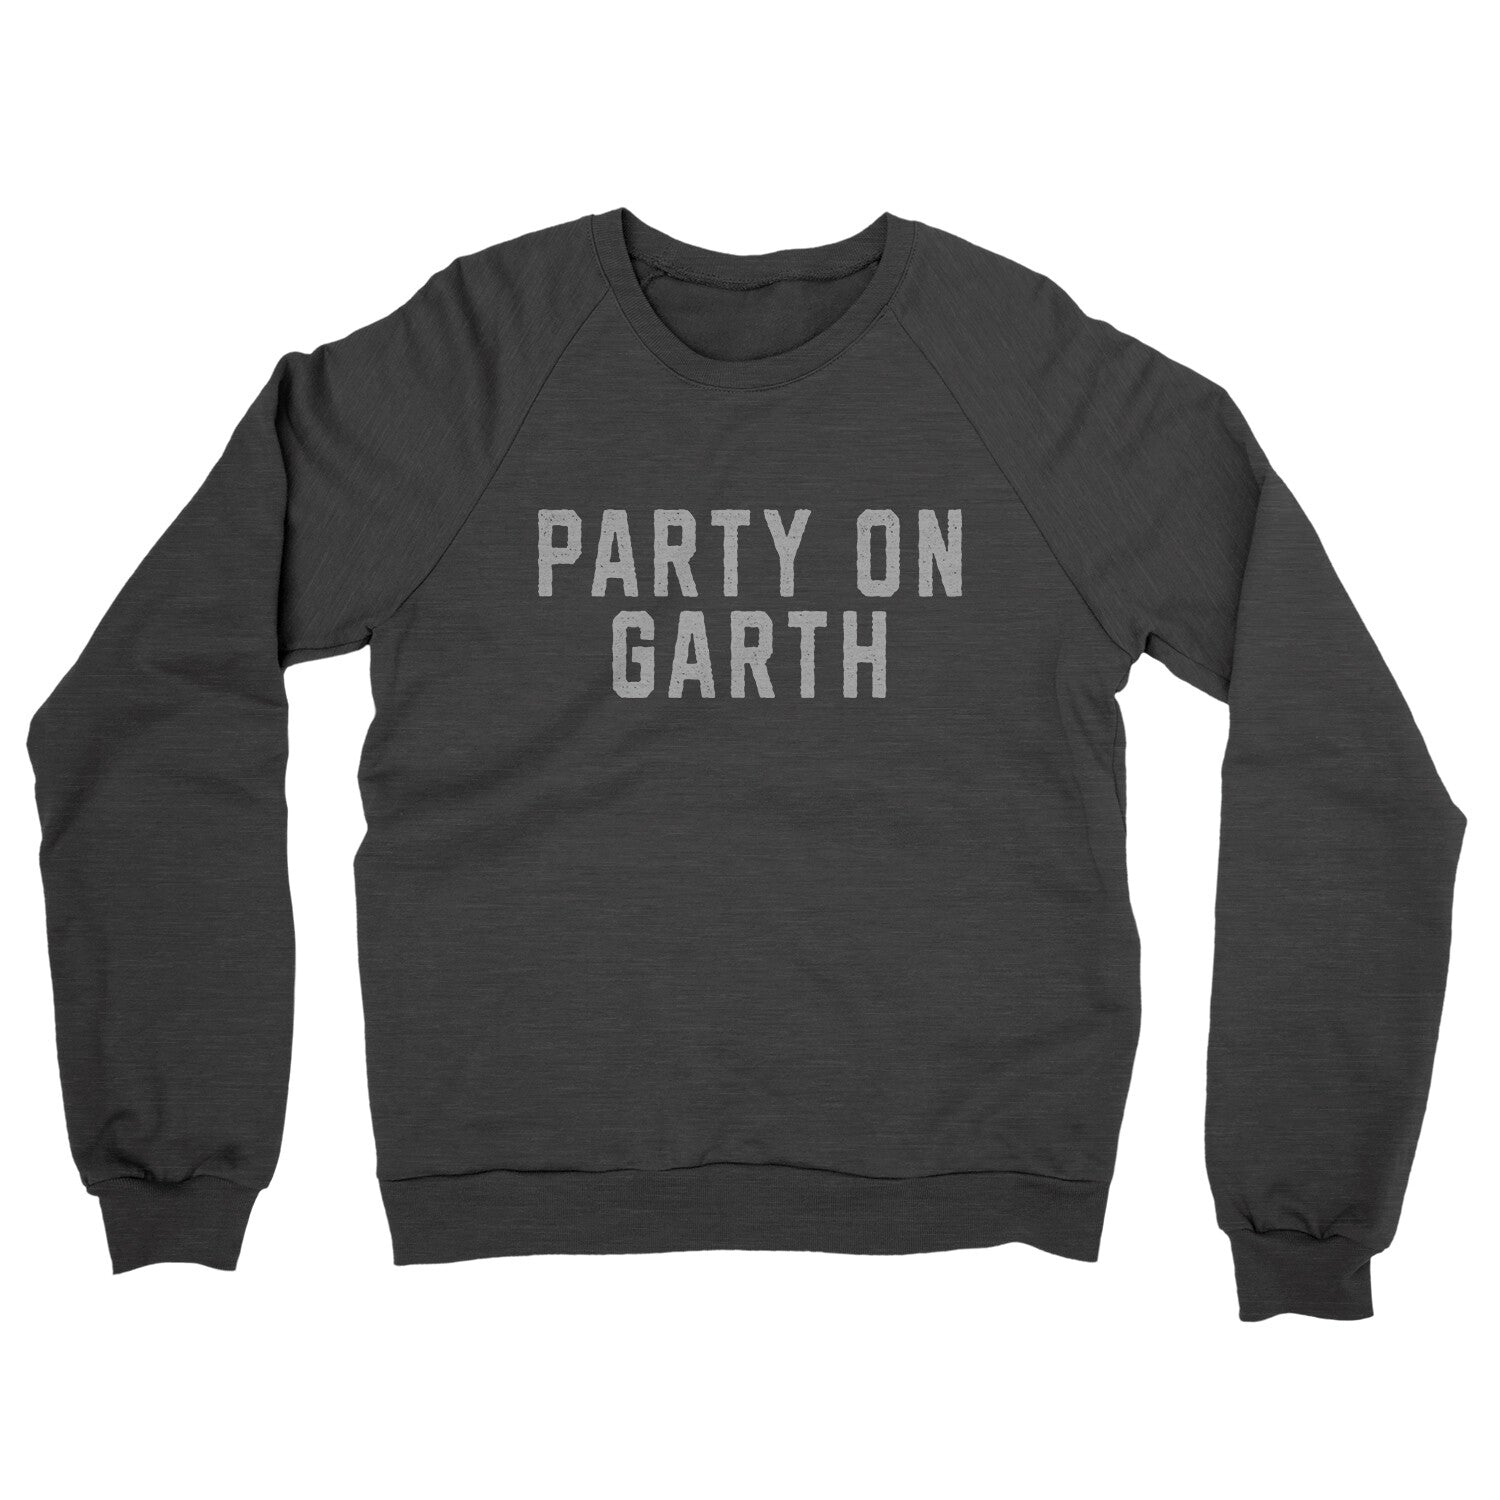 Party on Garth in Charcoal Heather Color